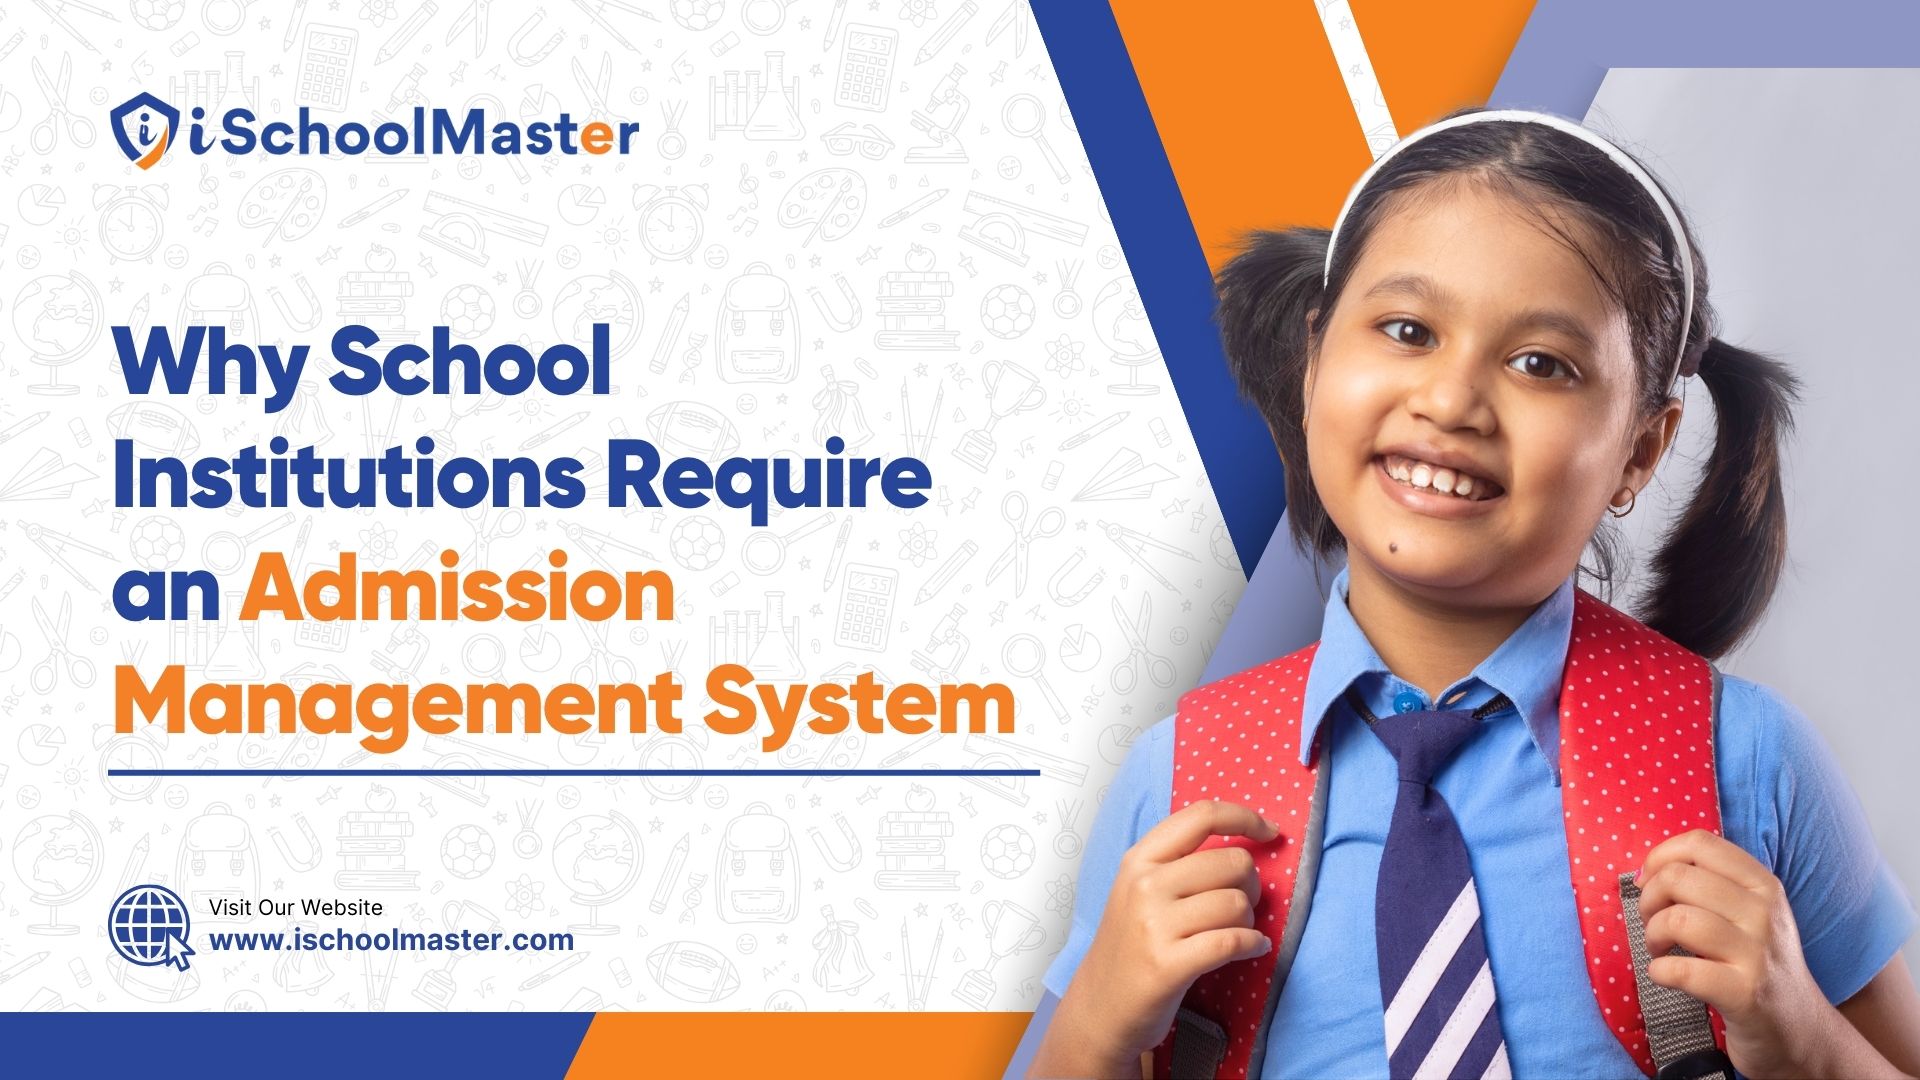 School Institutions Require an Admission Management System